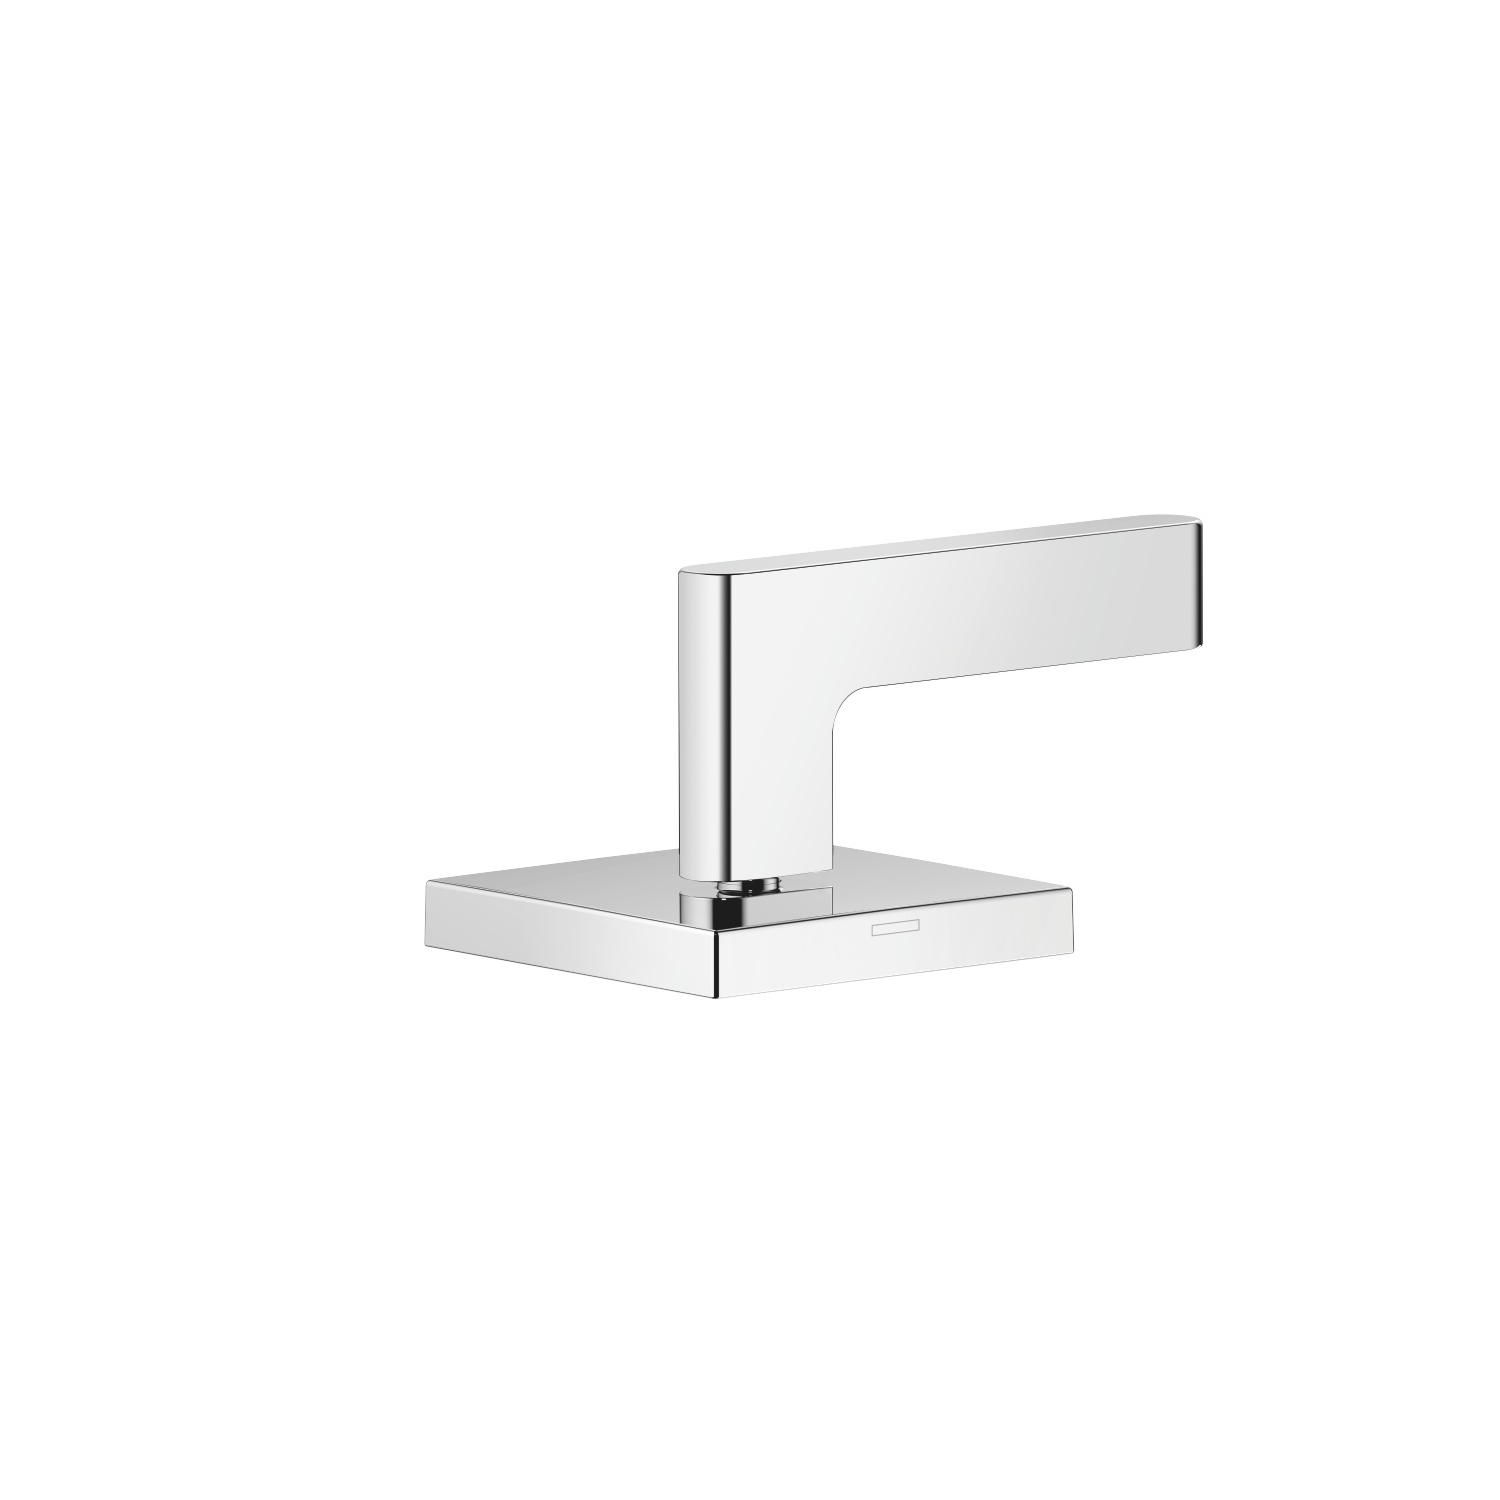 CL.1 Deck Mounted Thermostatic Valve-Hot In Polished Chrome